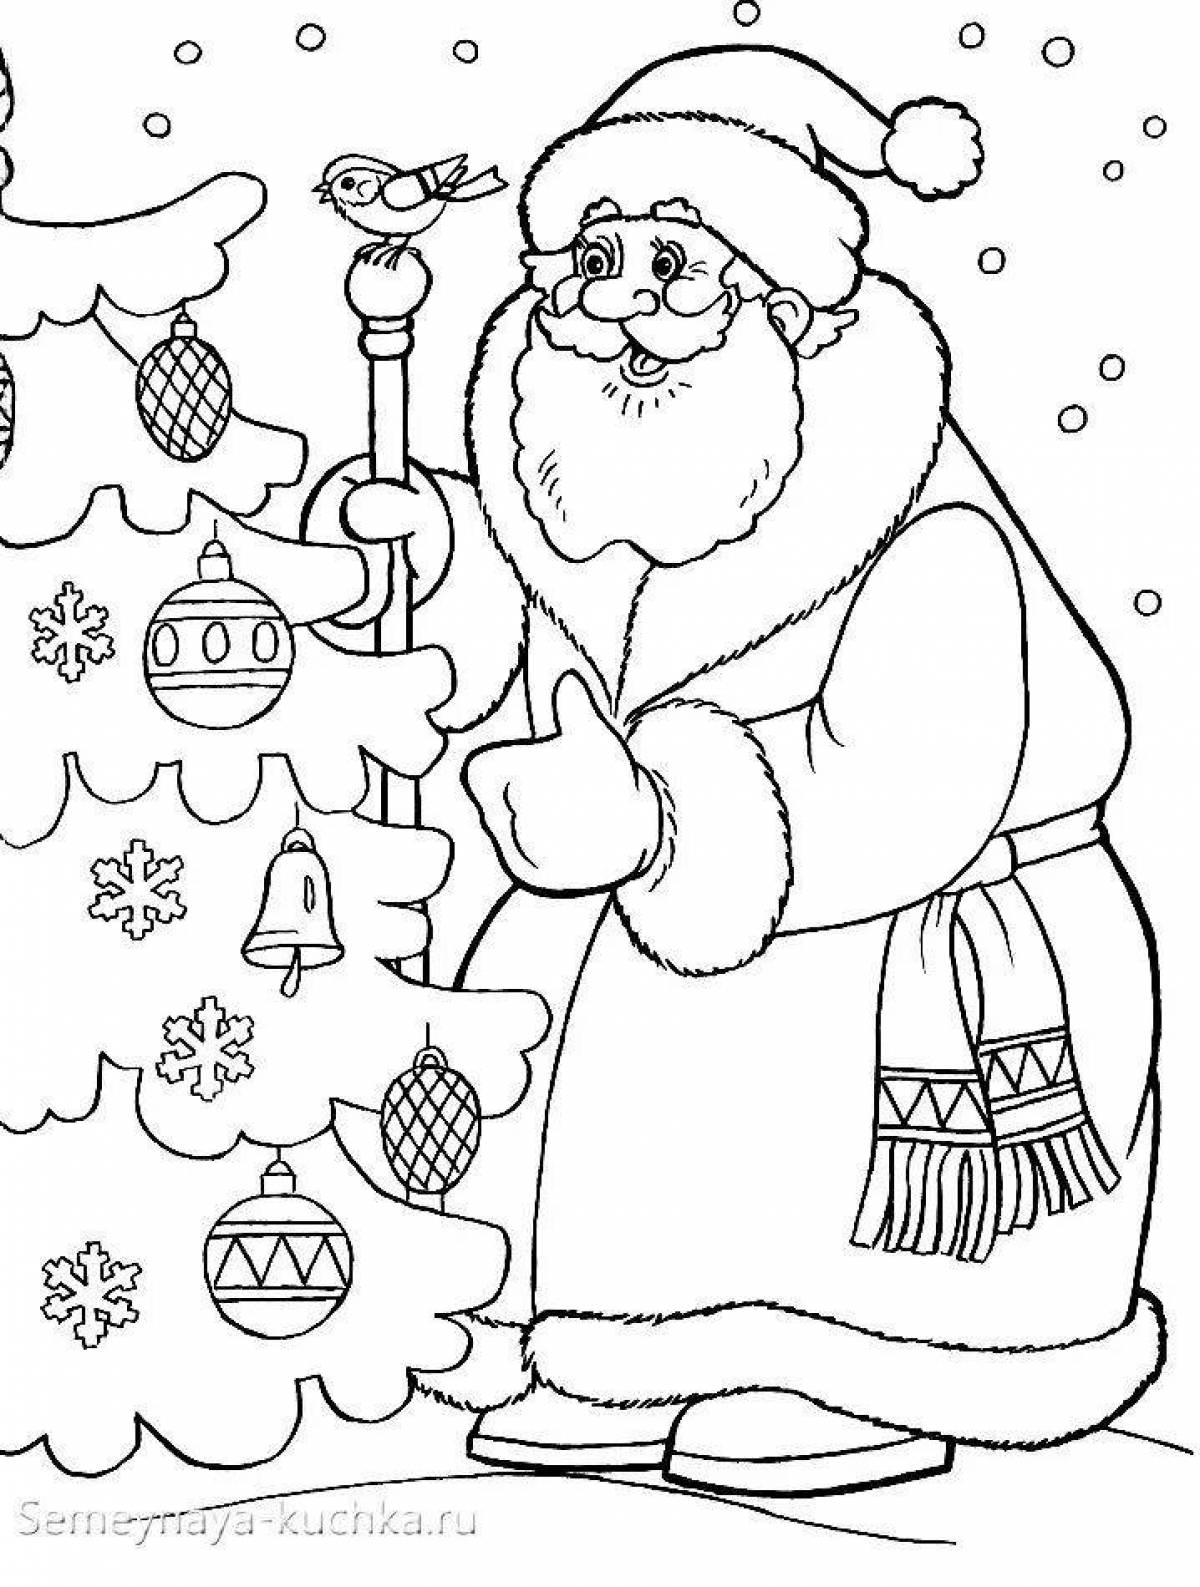 Magic Santa Claus coloring book for 2-3 year olds